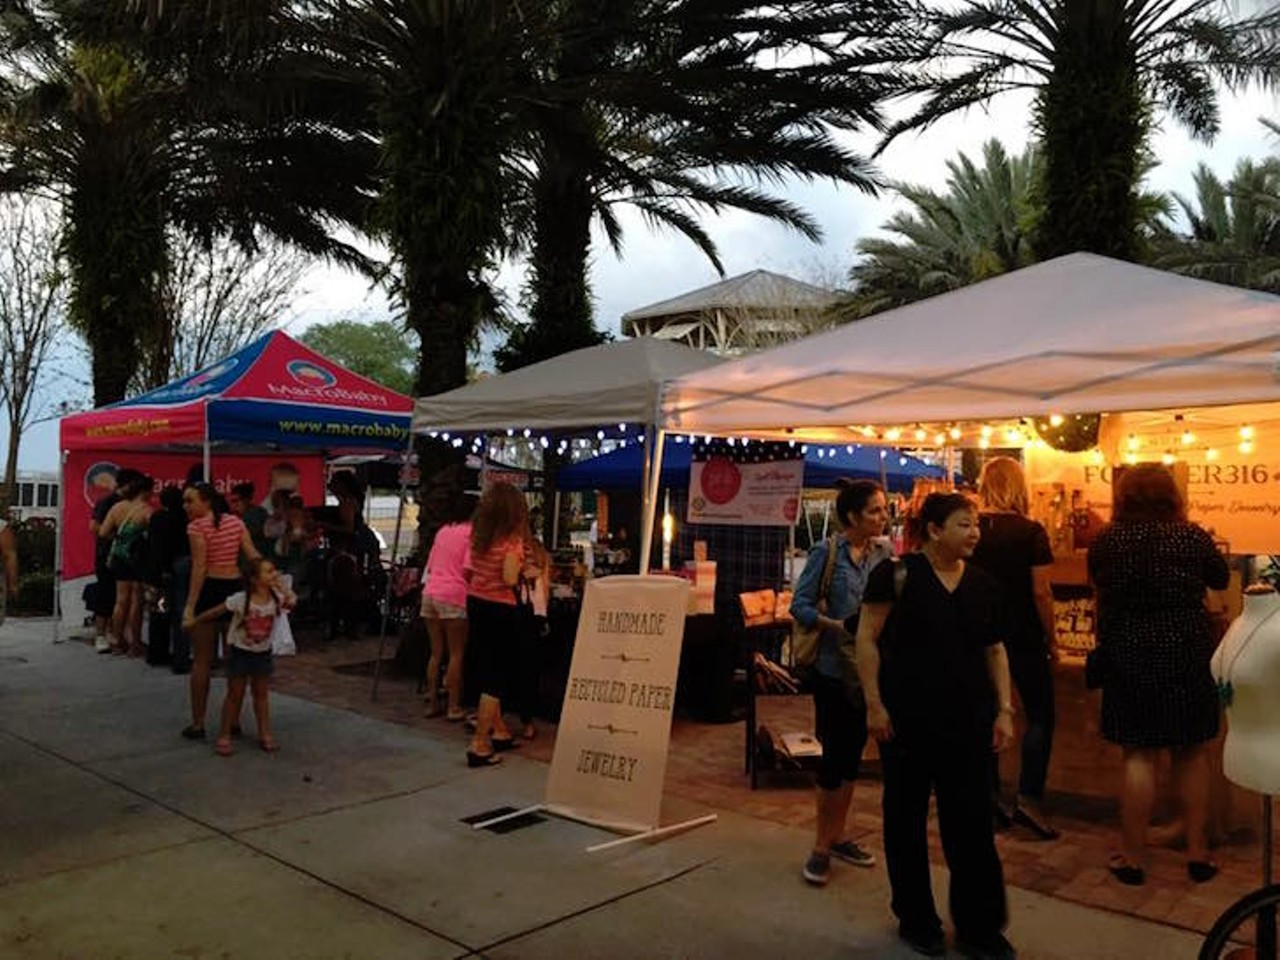 Be patrons of the arts at the Baldwin Park First Friday Festival & Art Stroll
Baldwin Park, 407-740-5838 
Make a Friday date night to see over 60 artisans and small businesses showing their wares in Baldwin Park. There&#146;s a festival every first Friday. 
Photo via Baldwin Park First Friday Festival/Facebook